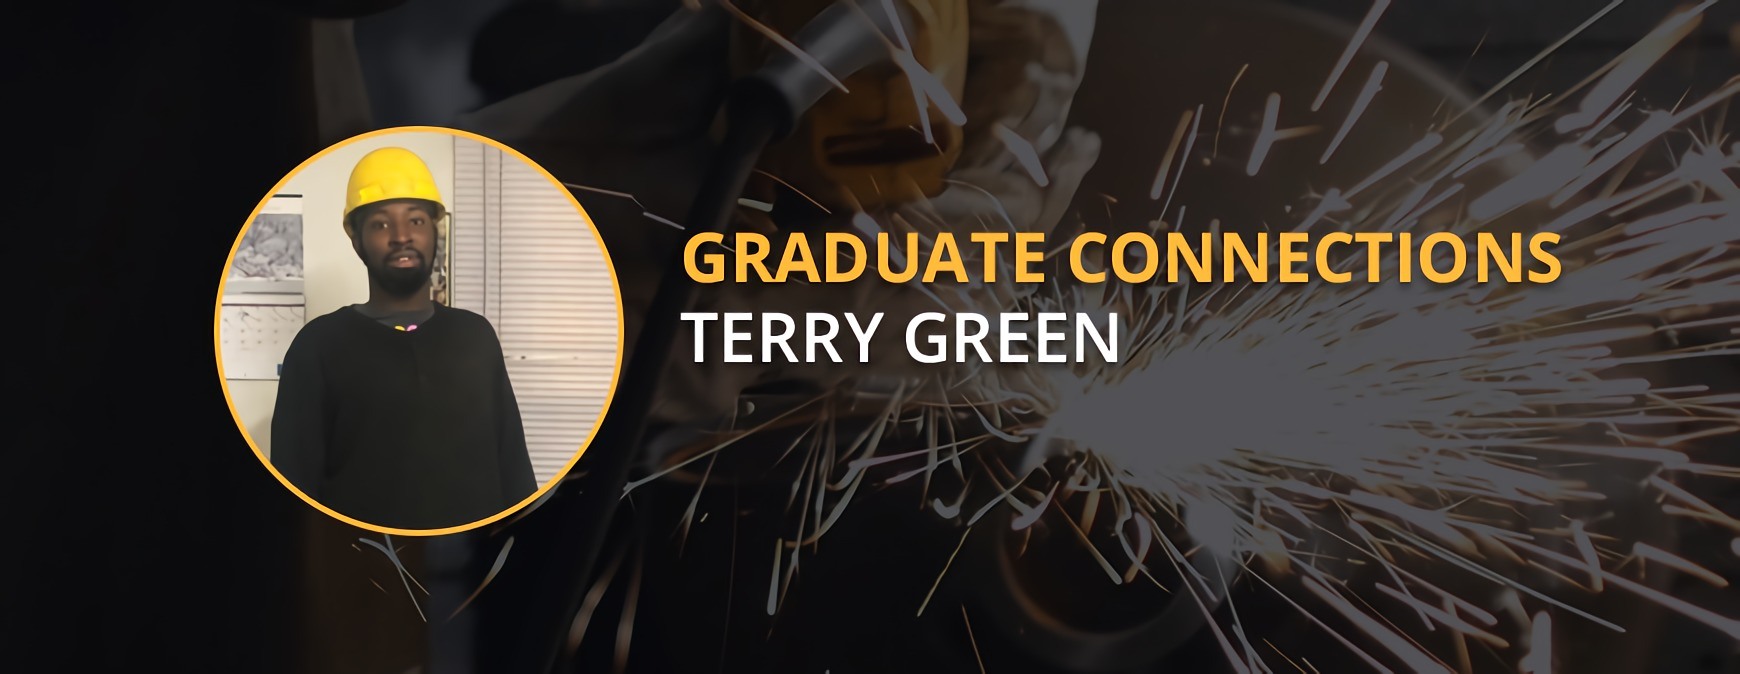 Terry Green Graduate Connections